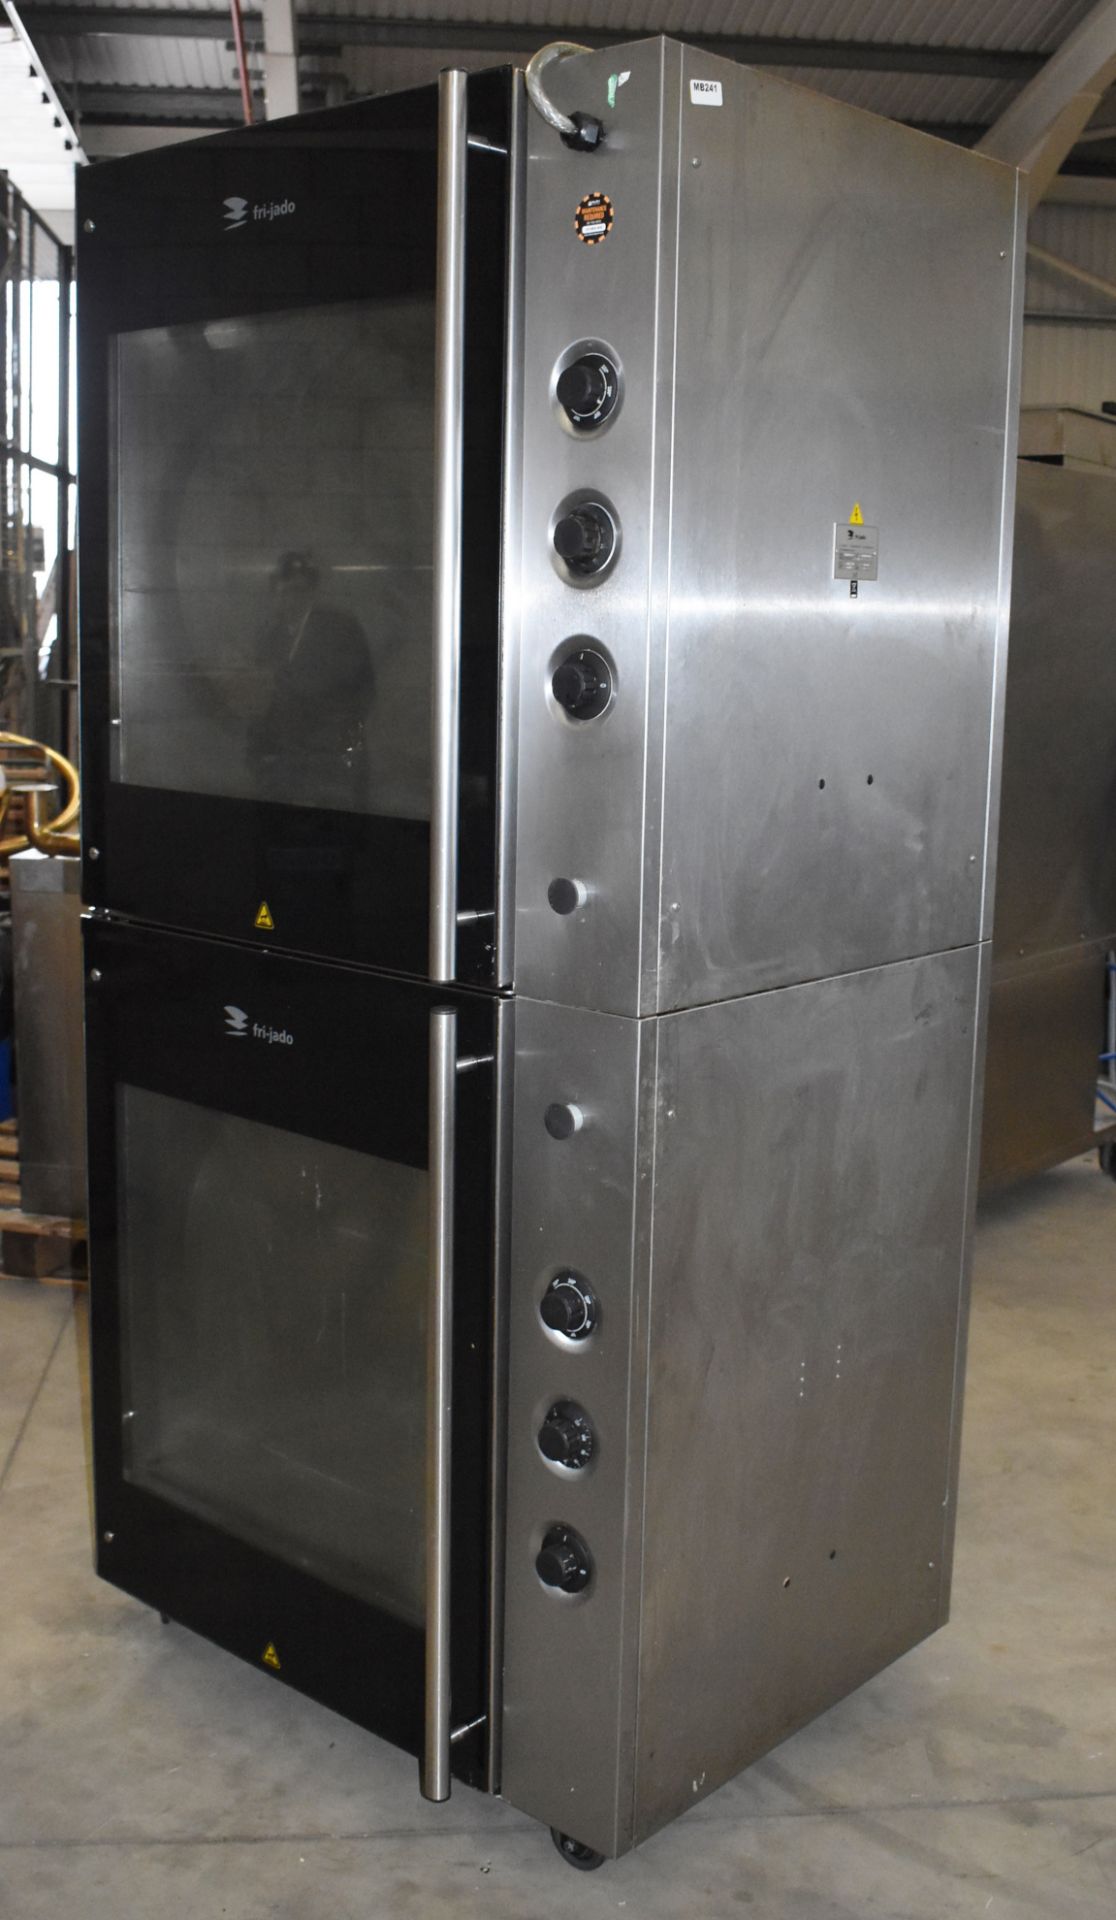 1 x Fri-Jado TDR8+8 Manual Chicken Rotisserie Double Oven - Holds 80 Chickens - CL453 - 3 Phase - Image 9 of 12